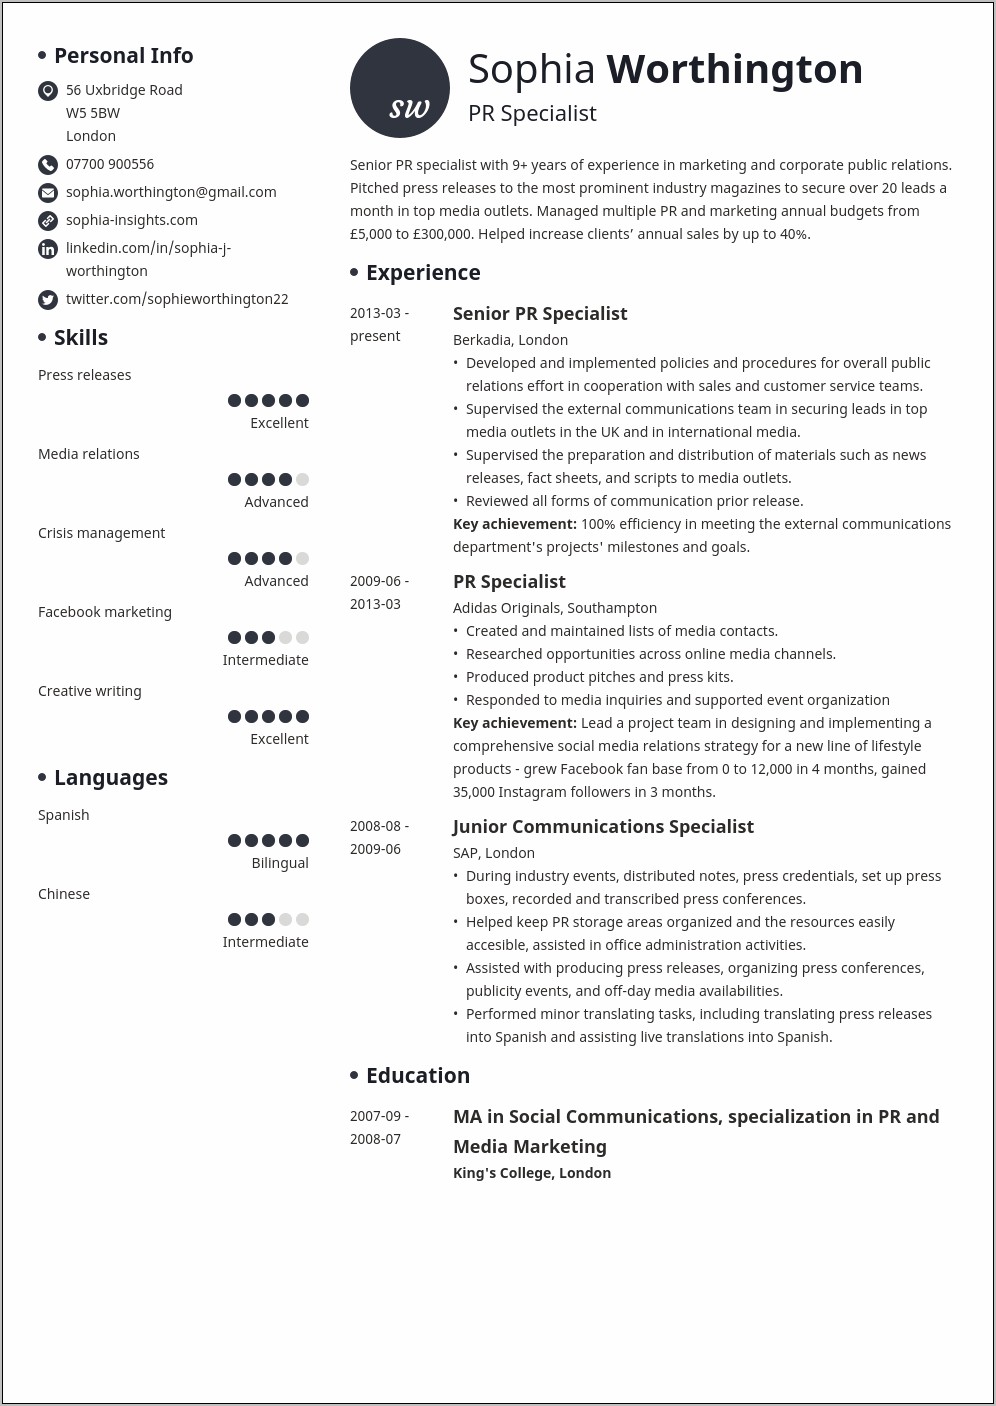 Examples Of Personal Info Resume